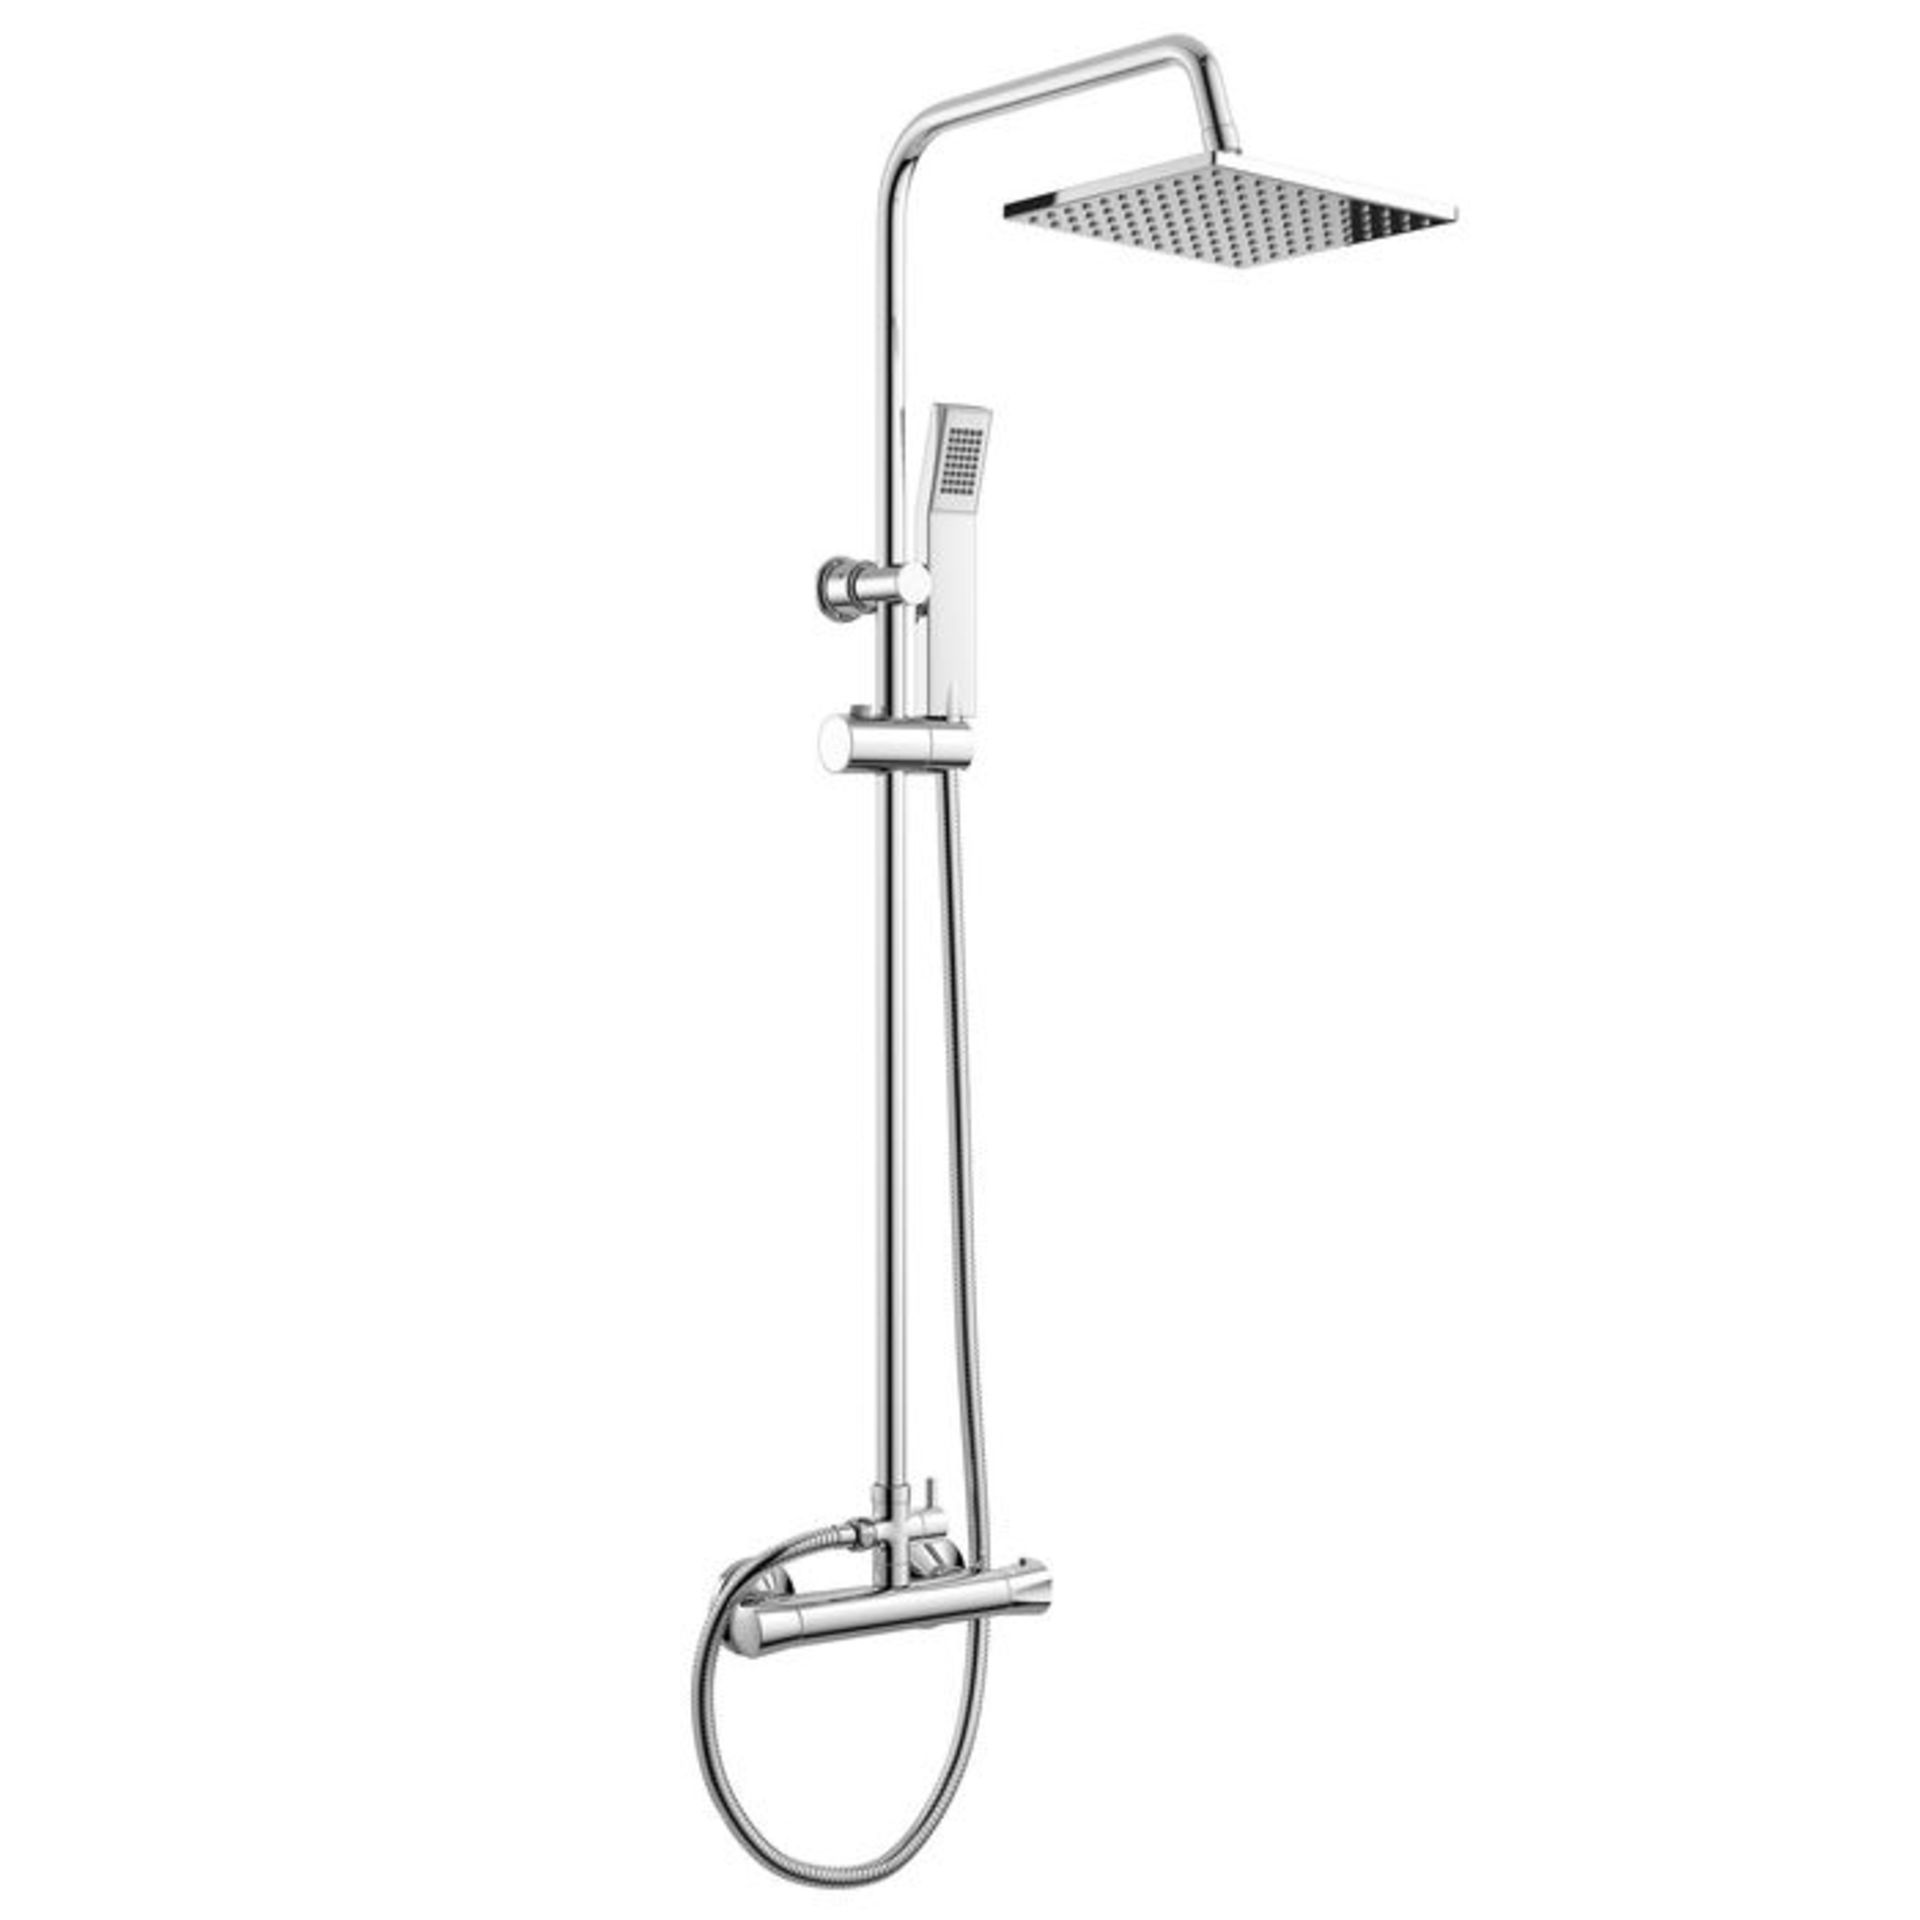 (J156) 200mm Square Head Thermostatic Exposed Shower Kit & Hand Held. We love this because it - Image 2 of 3